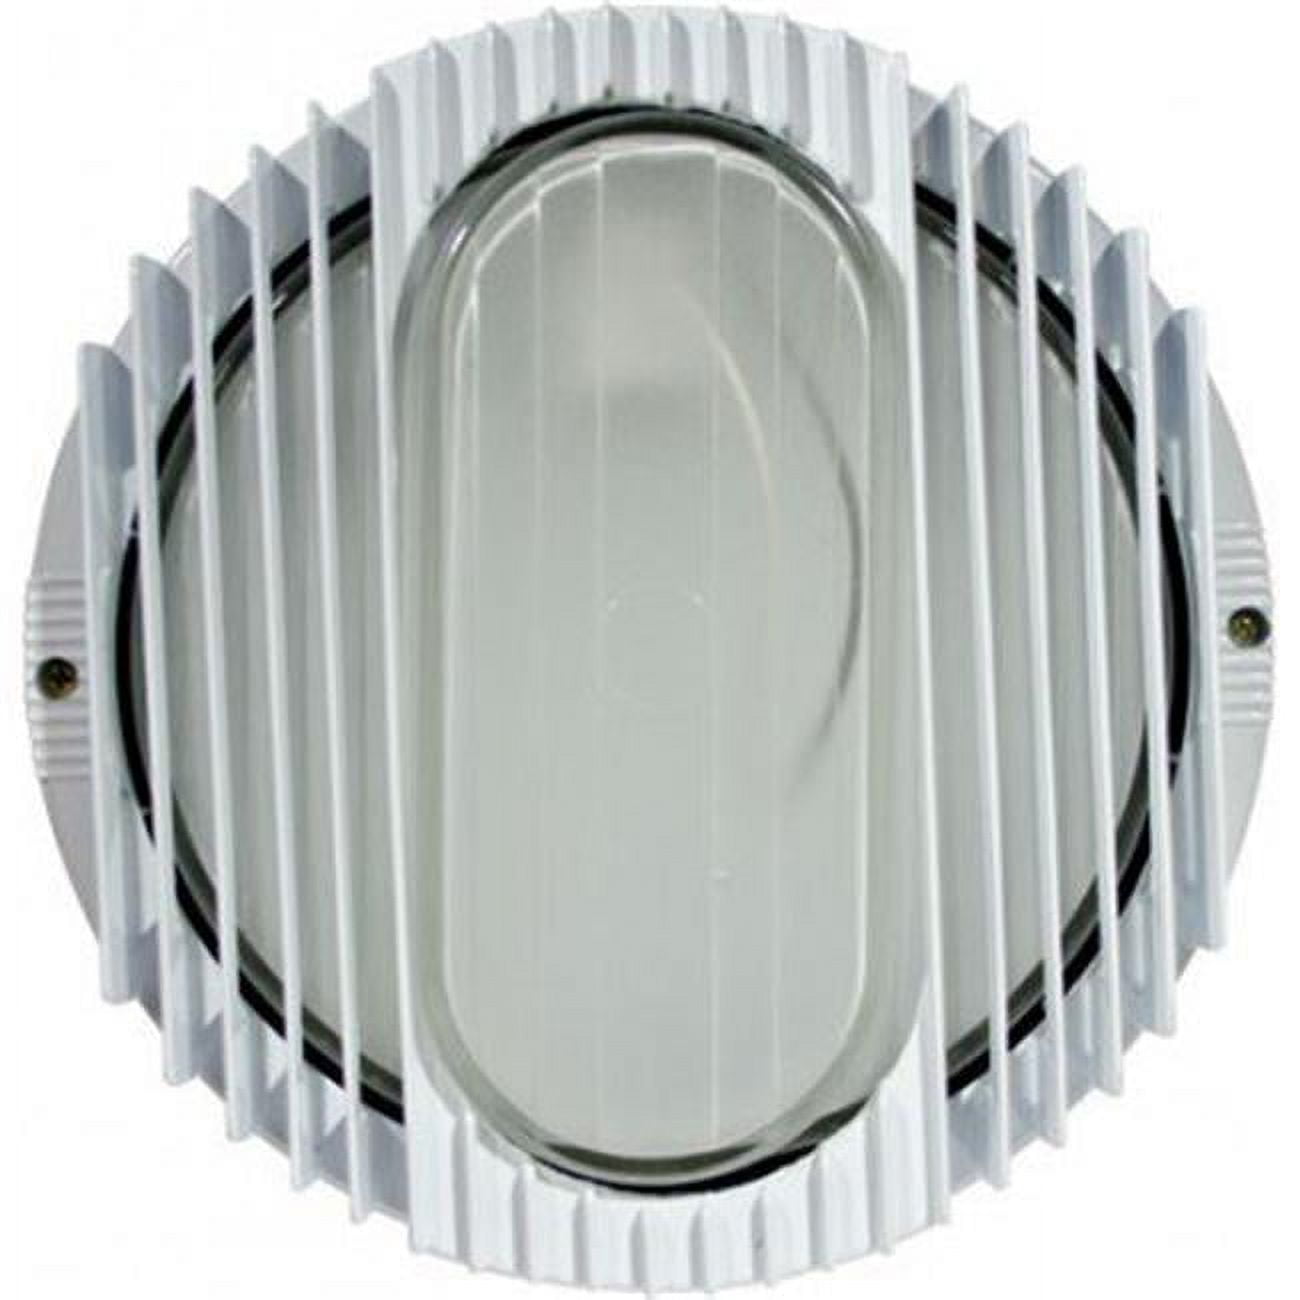 Picture of Dabmar Lighting W3057-W 60 watt PL7 Surface Mount Wall Fixture, White - 120V